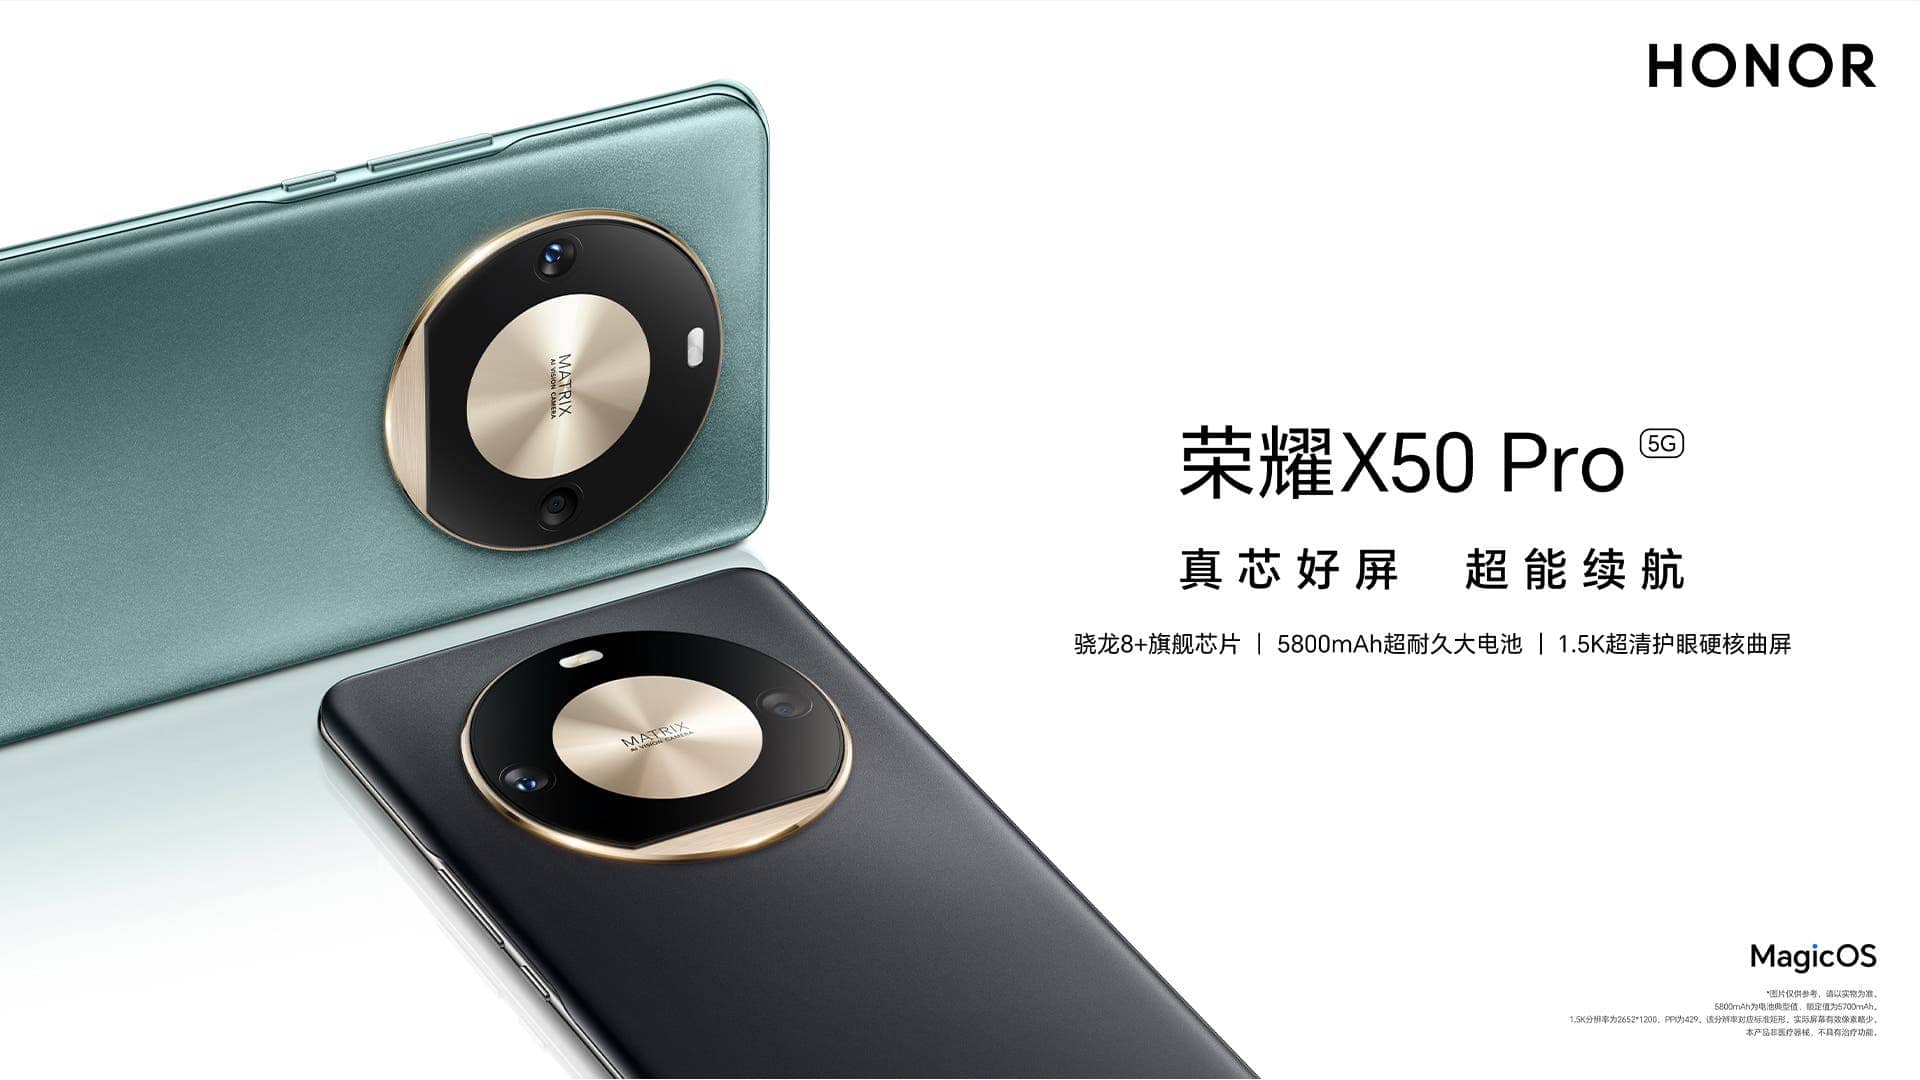 Honor X50 Pro launches with an exquisite design - Gizchina.com